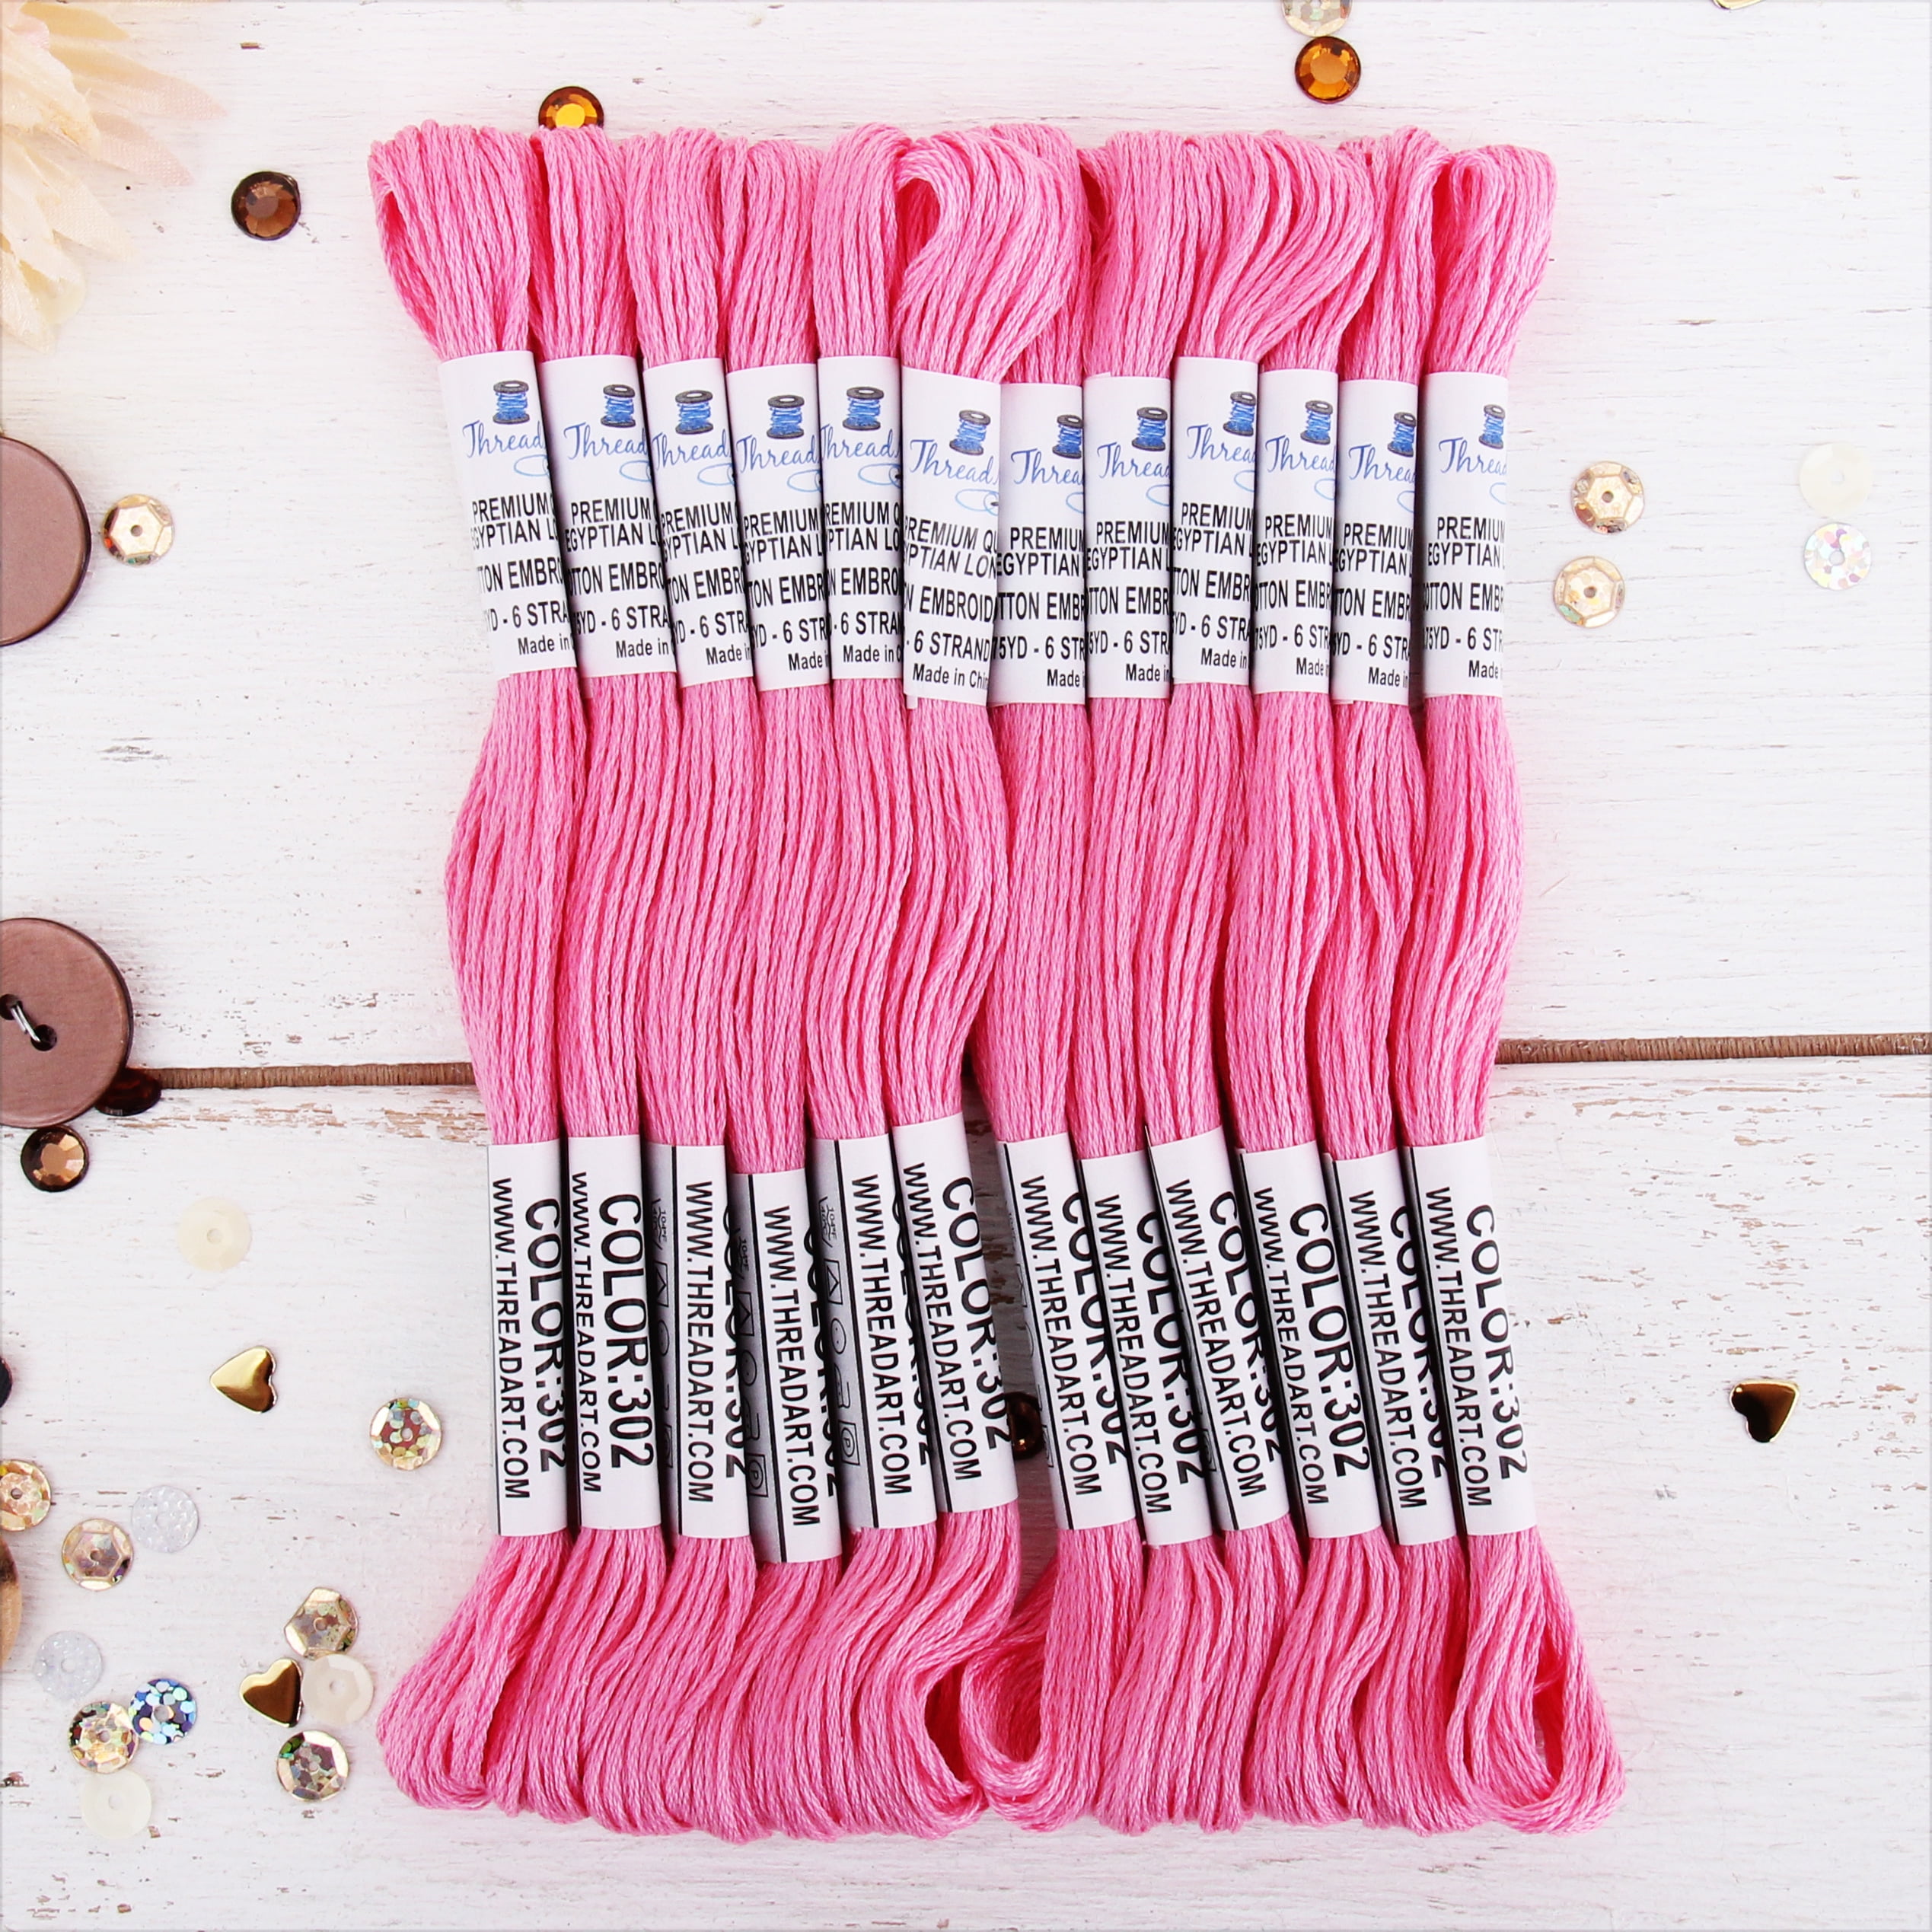 DMC Cotton Embroidery Floss 100% Cotton Embroidery Thread Embroidery Fiber Embroidery  String Mouline Cotton Mouline Fiber Mouline String 